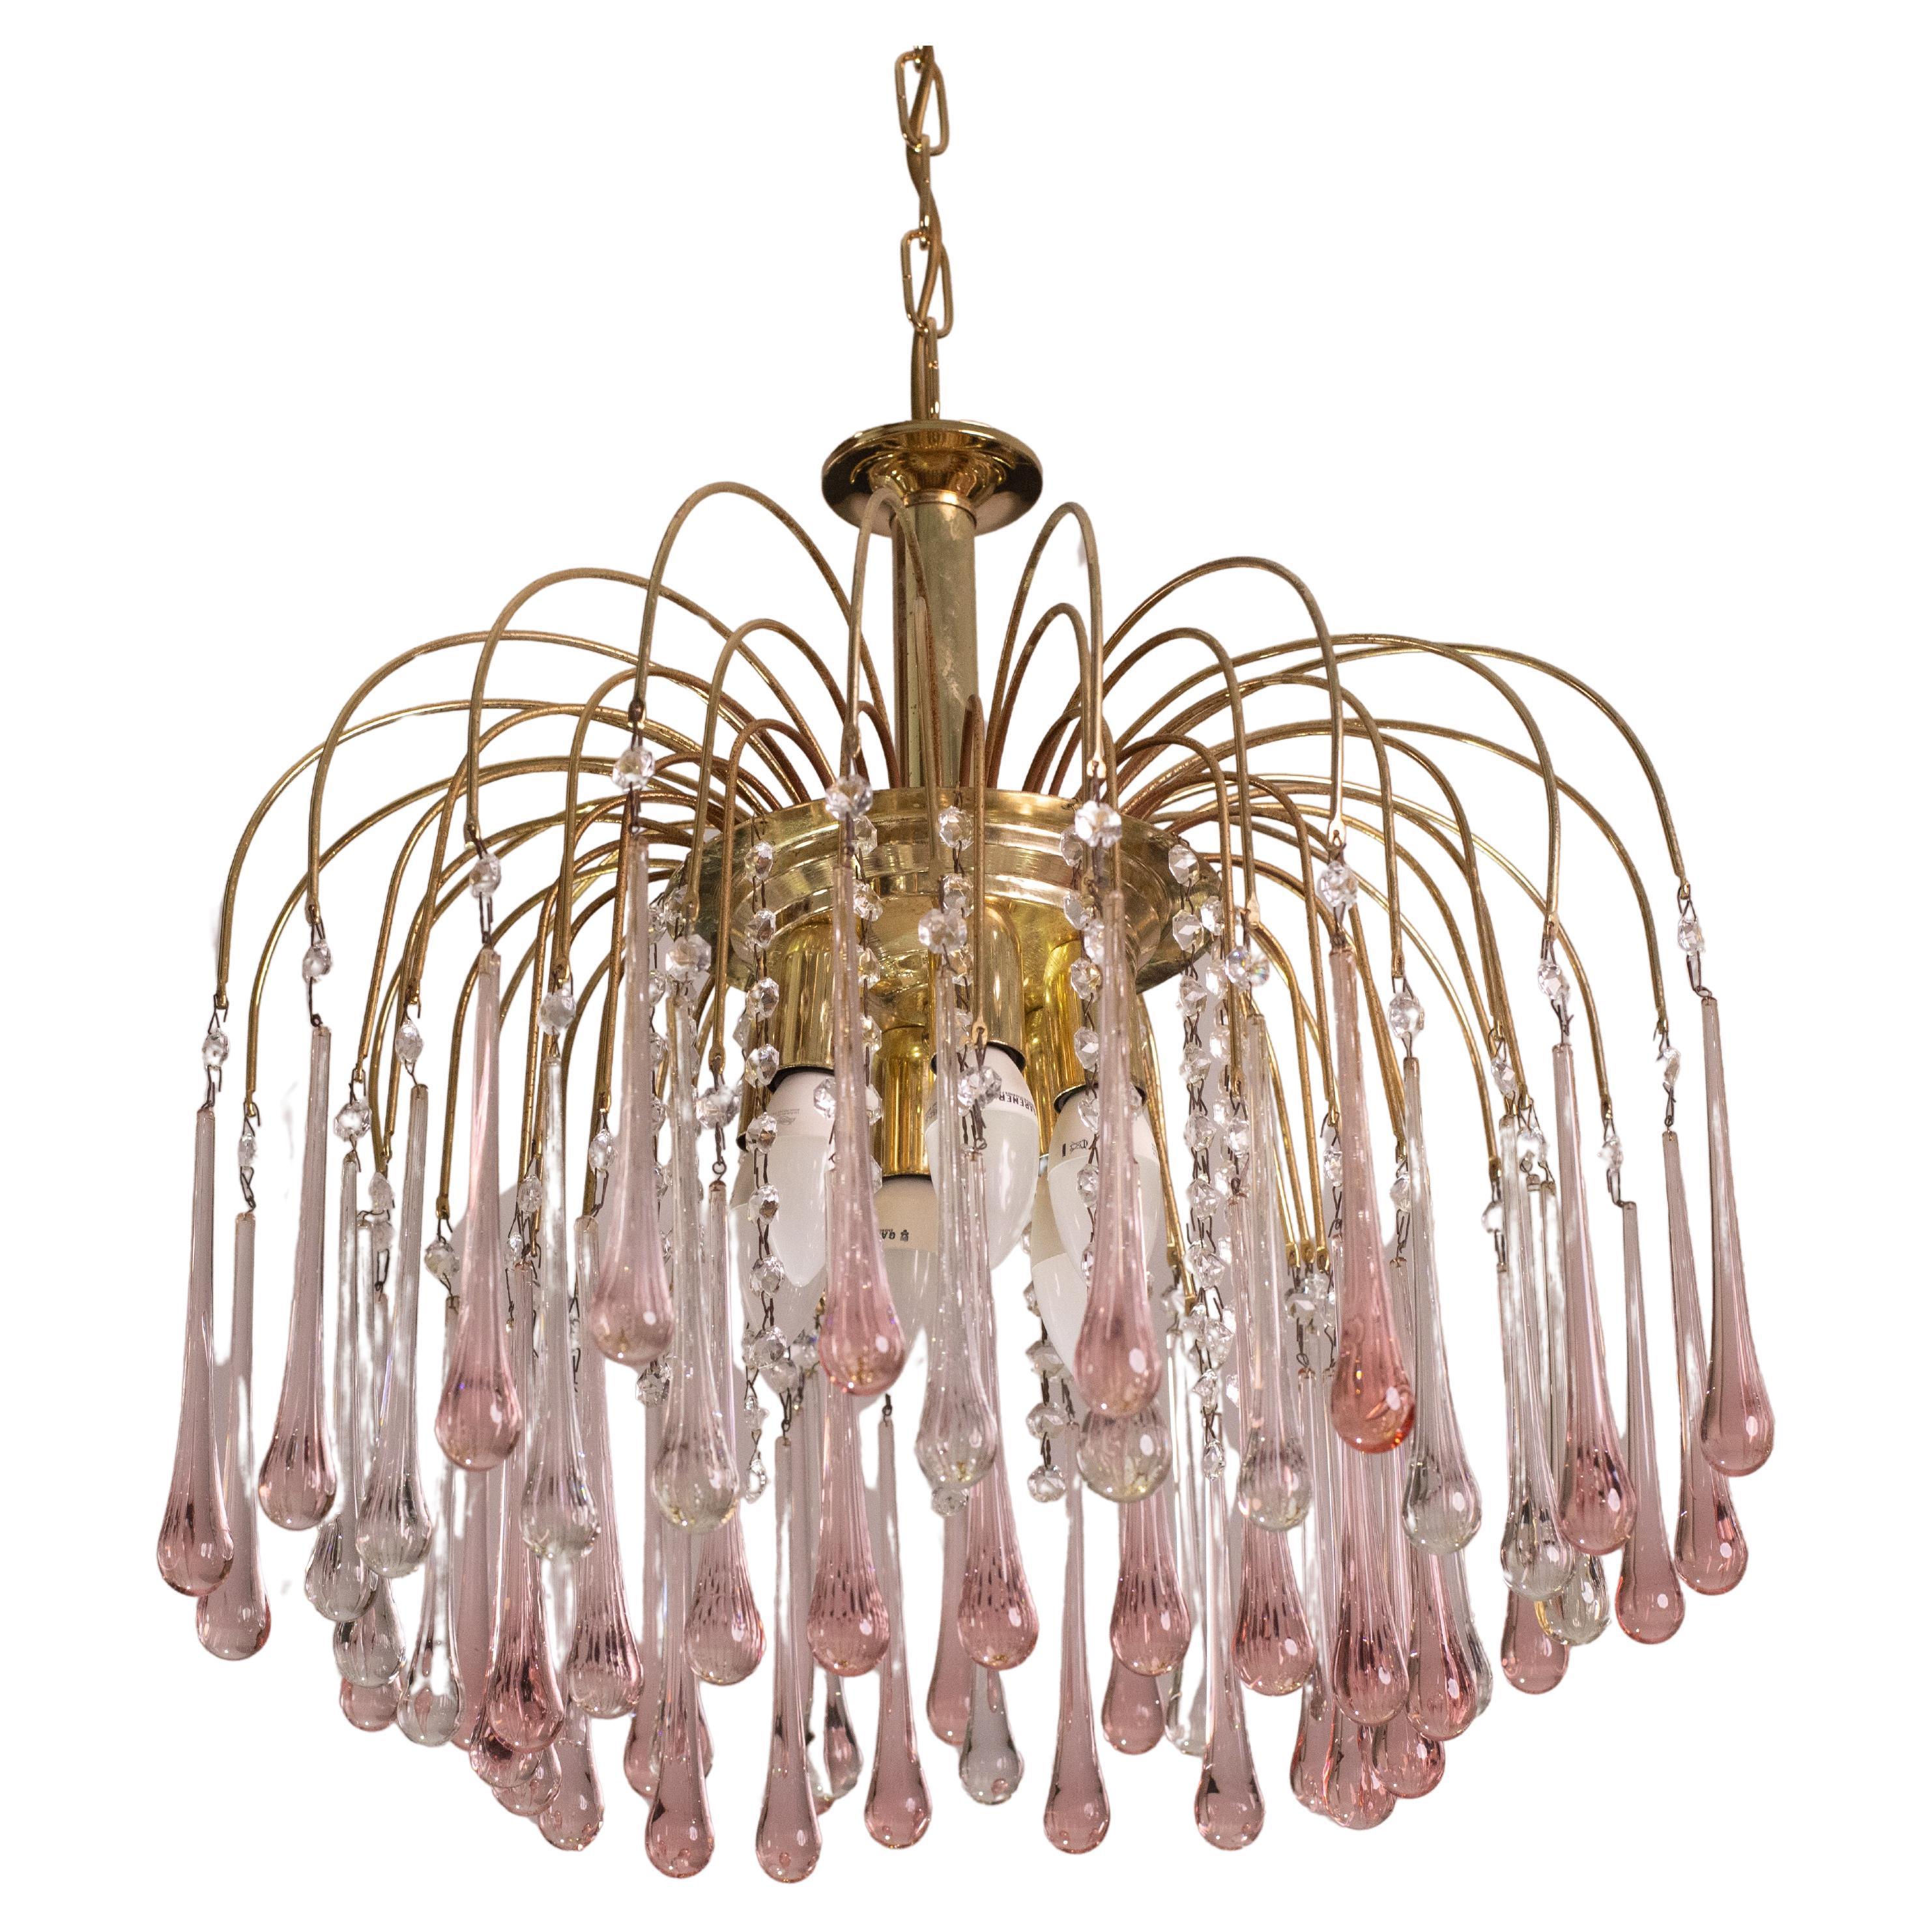 Stunning Murano chandelier in the style of Venini La Cascata.
The chandelier consists of four laps composed of about 60 beautiful transparent white and pink drops cascading down.
The chandelier consists of 4 rounds: a central one with crystals, the